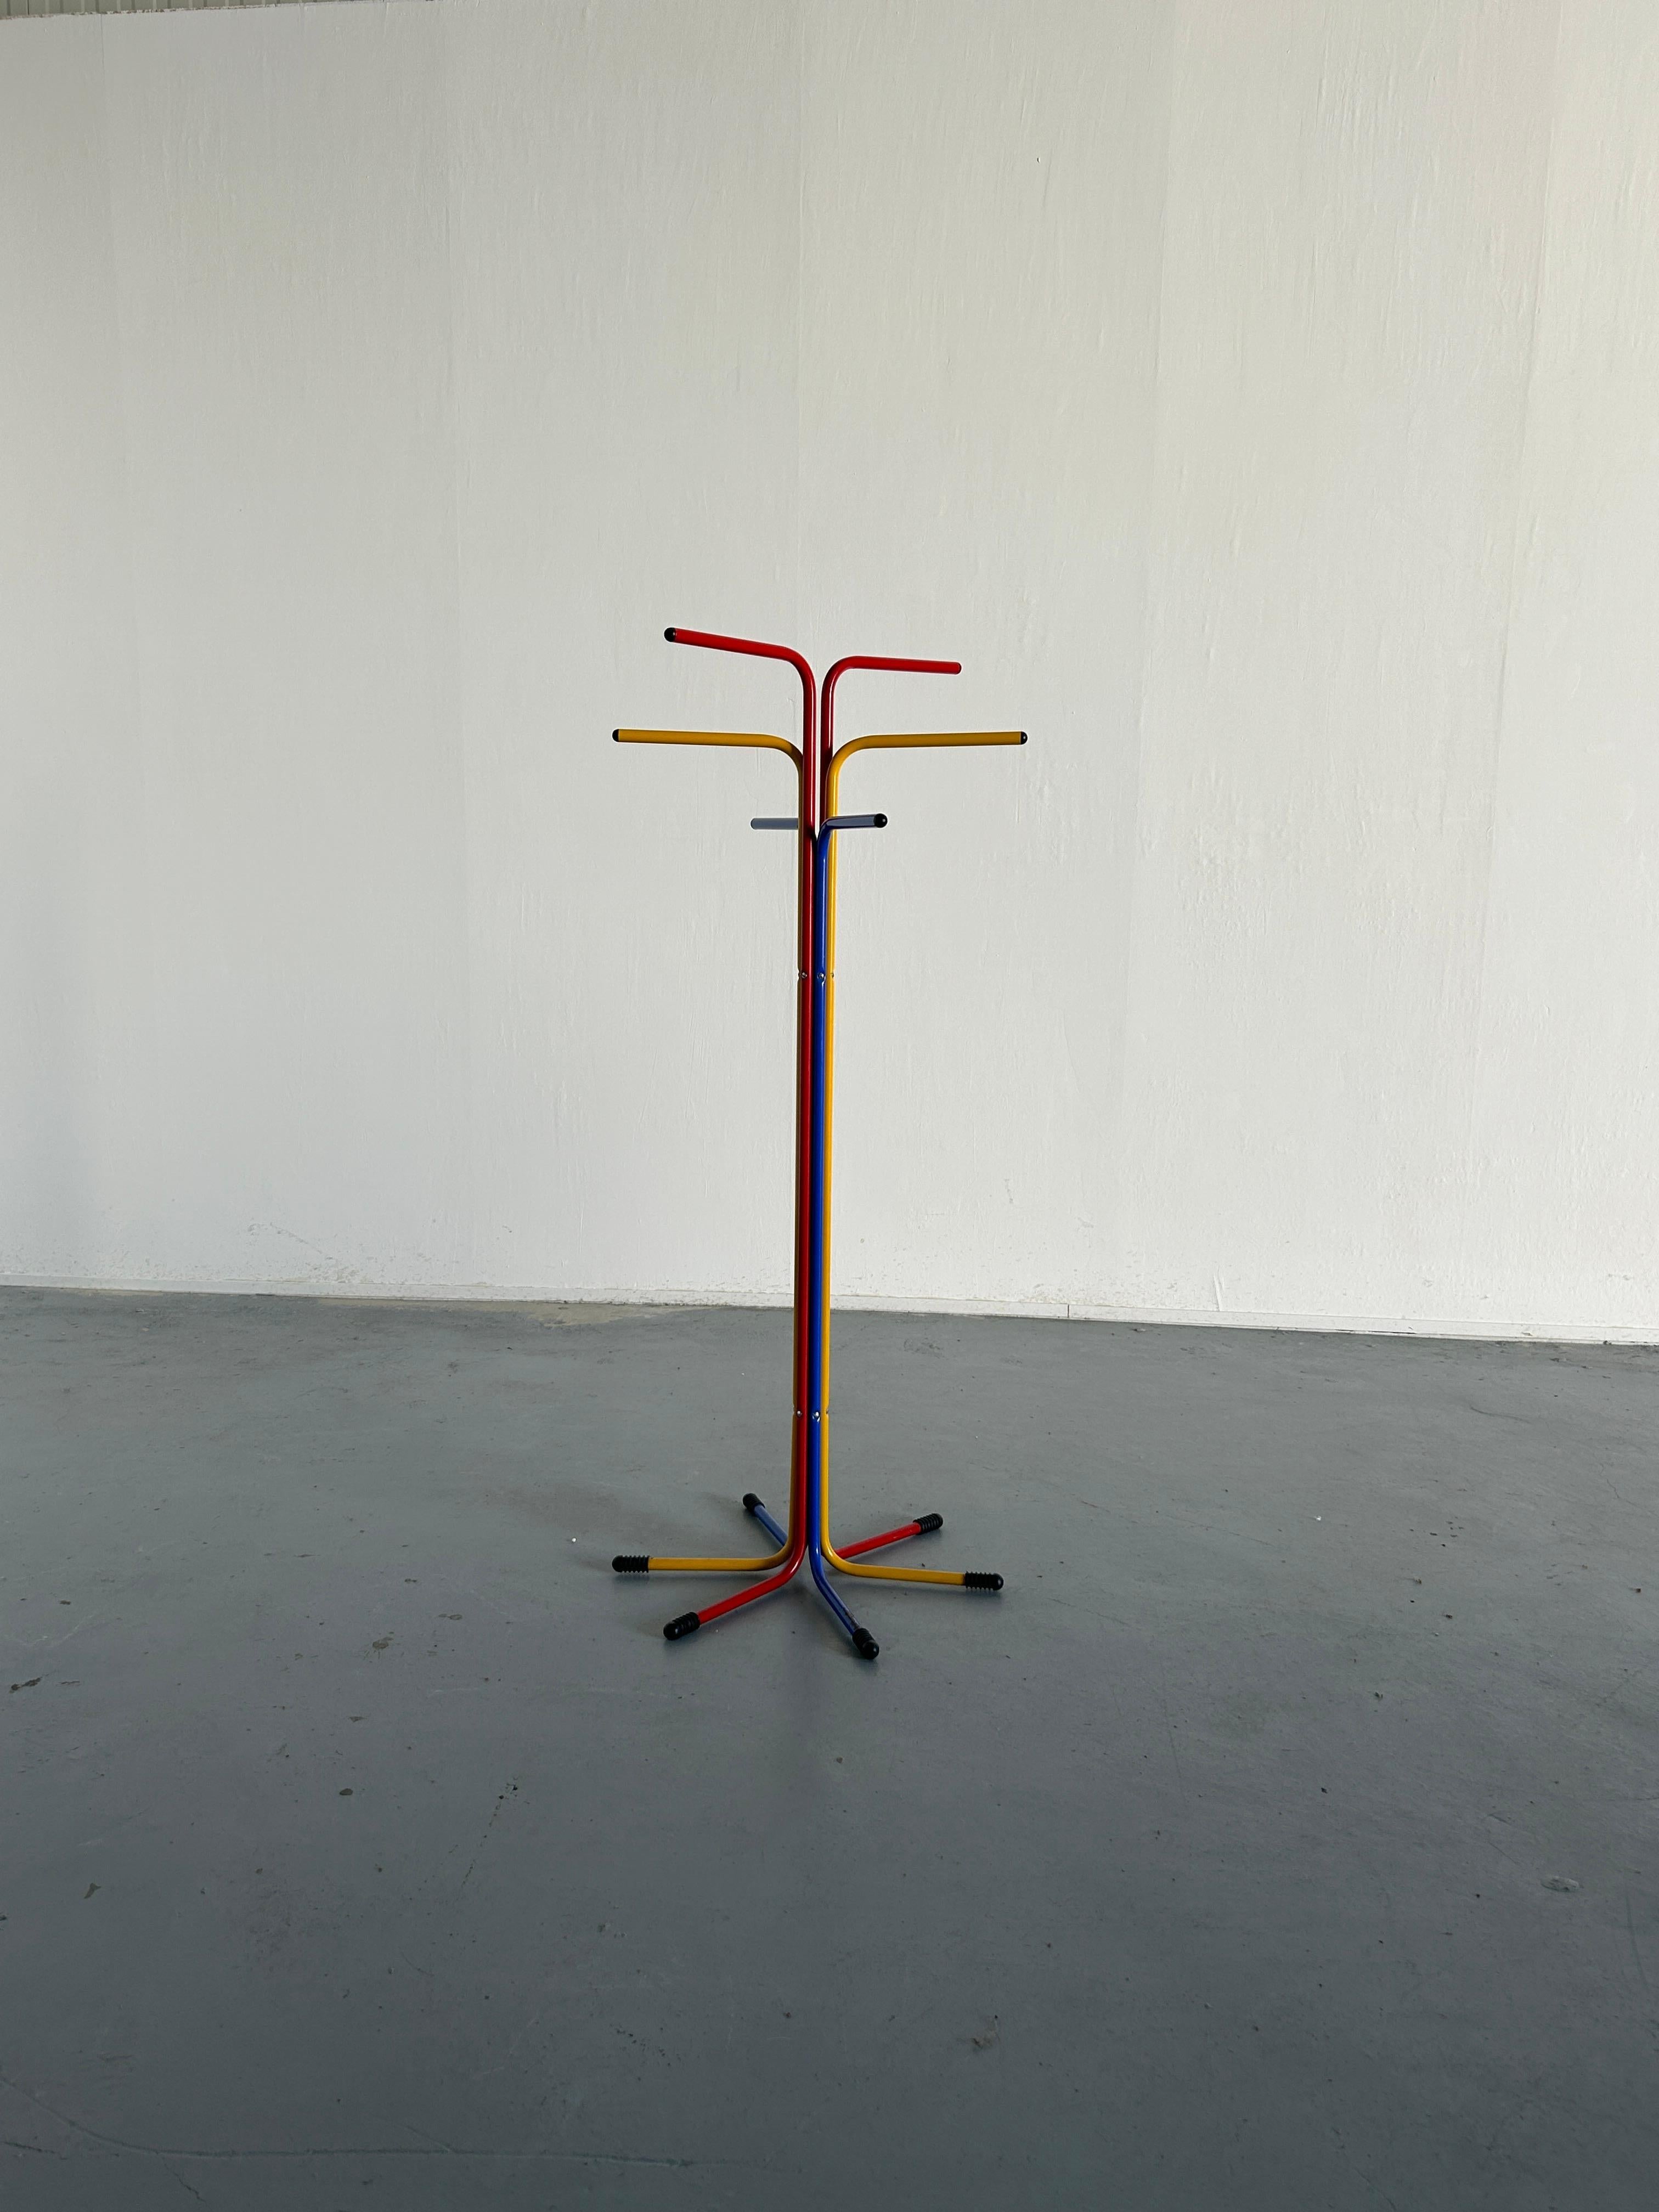 Beautiful vintage RIGG coat stand, designed by Tord Bjorklund for Ikea, 1987. 
Primary colours, postmodern Memphis Milano style design. Smaller model (121cm height).

Overall in very good vintage condition with expected signs of age. One smaller